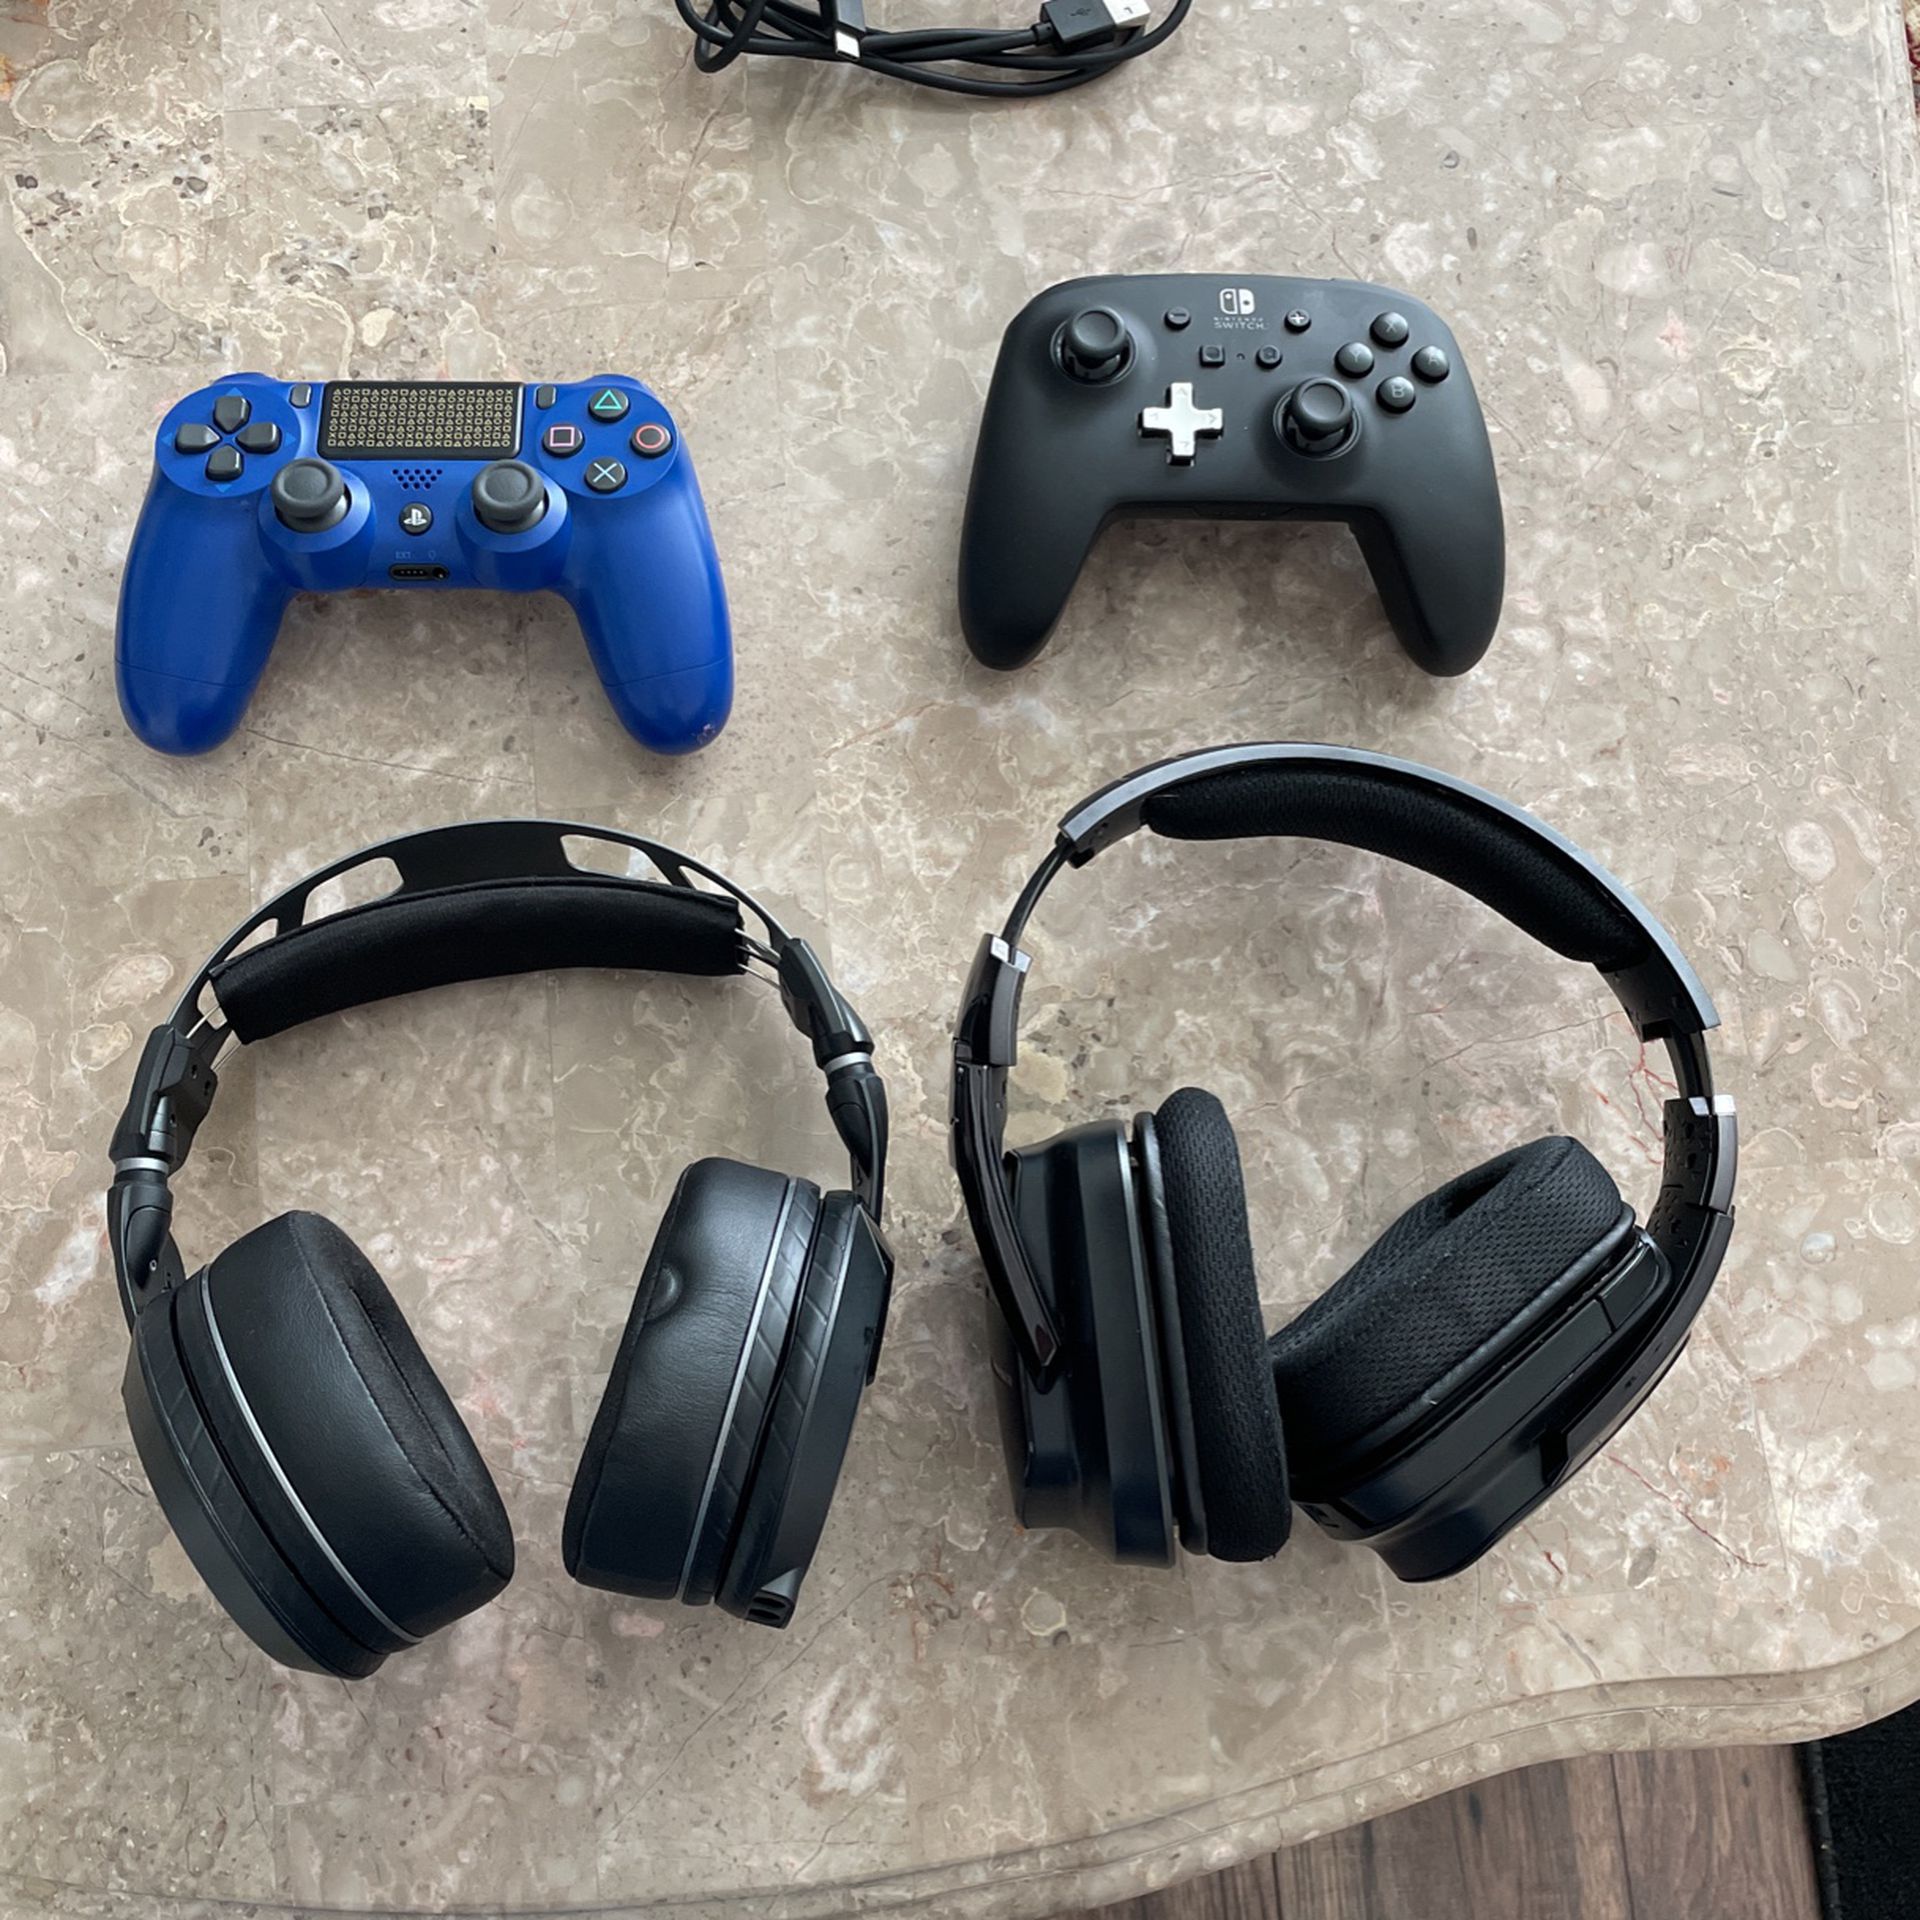 Headphones And Ps4 Controllers 